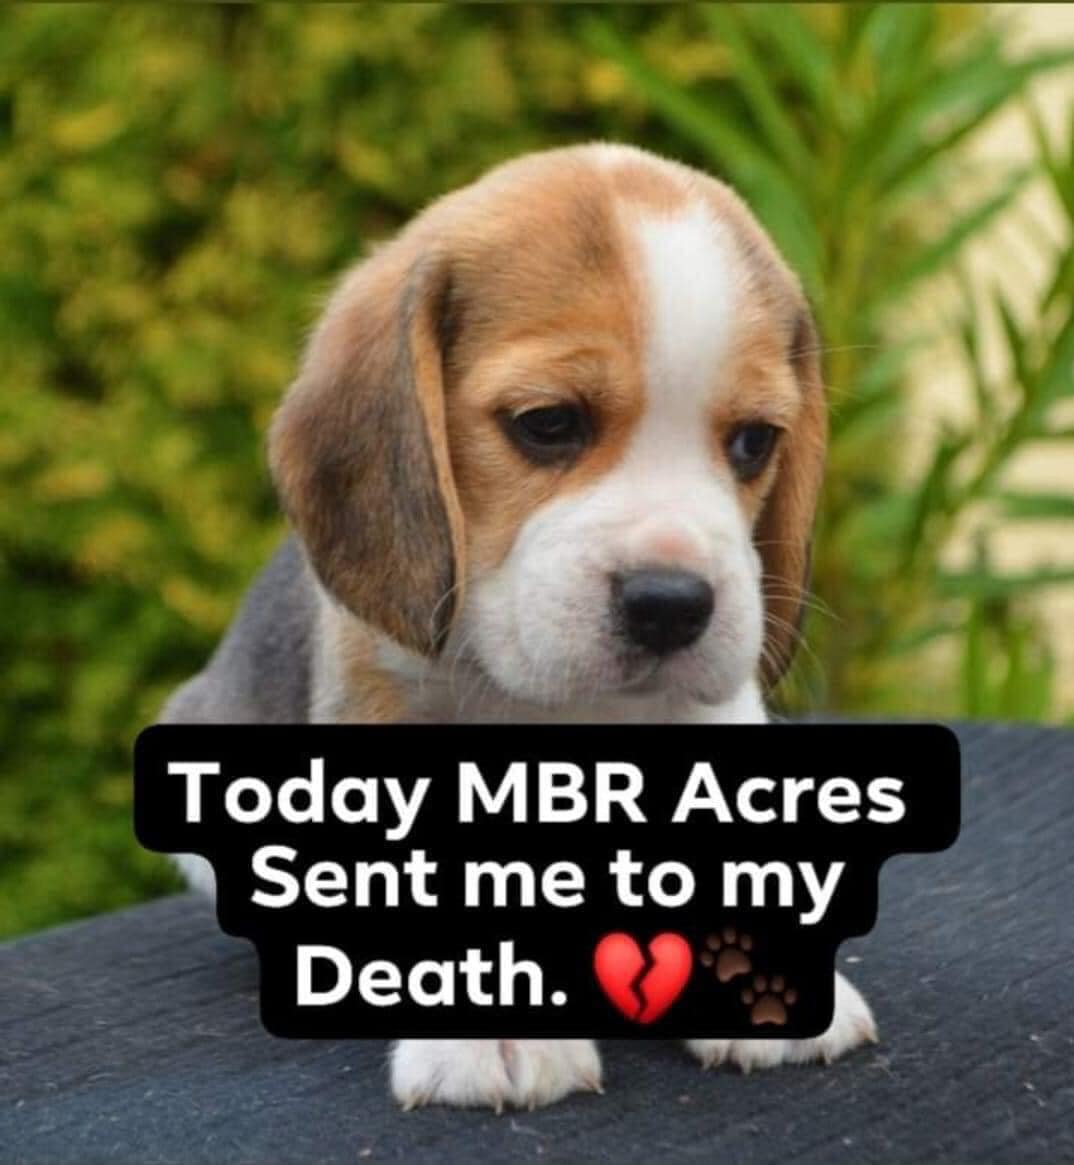 We were informed earlier today by our local network, that two more vans have gone into MBR Acres to transport sweet beagle puppies to the Research facilities. Potentially 50 puppies, just think !!!  #theprocessofanimaltestinghasneverbeenscientificallyvalidated @cbuk22 @CBUK10